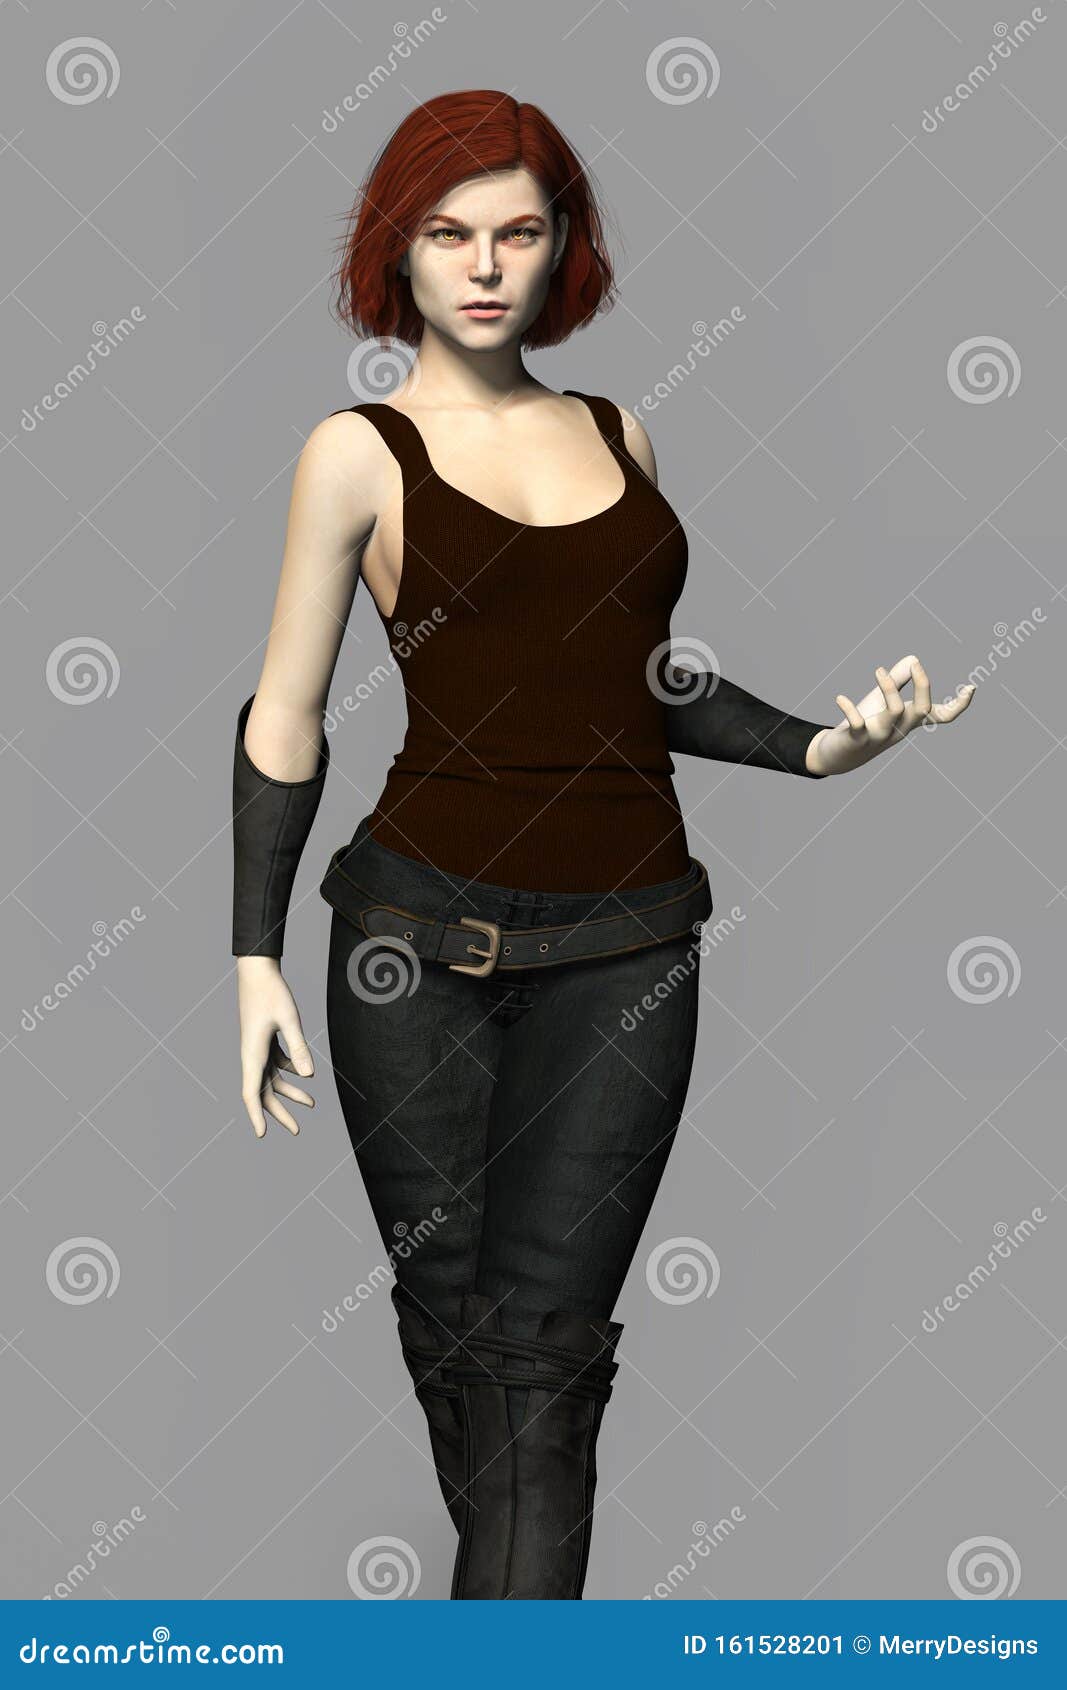 350+ Female Art Pose Reference Pictures 2024 - Free Daz 3D Models